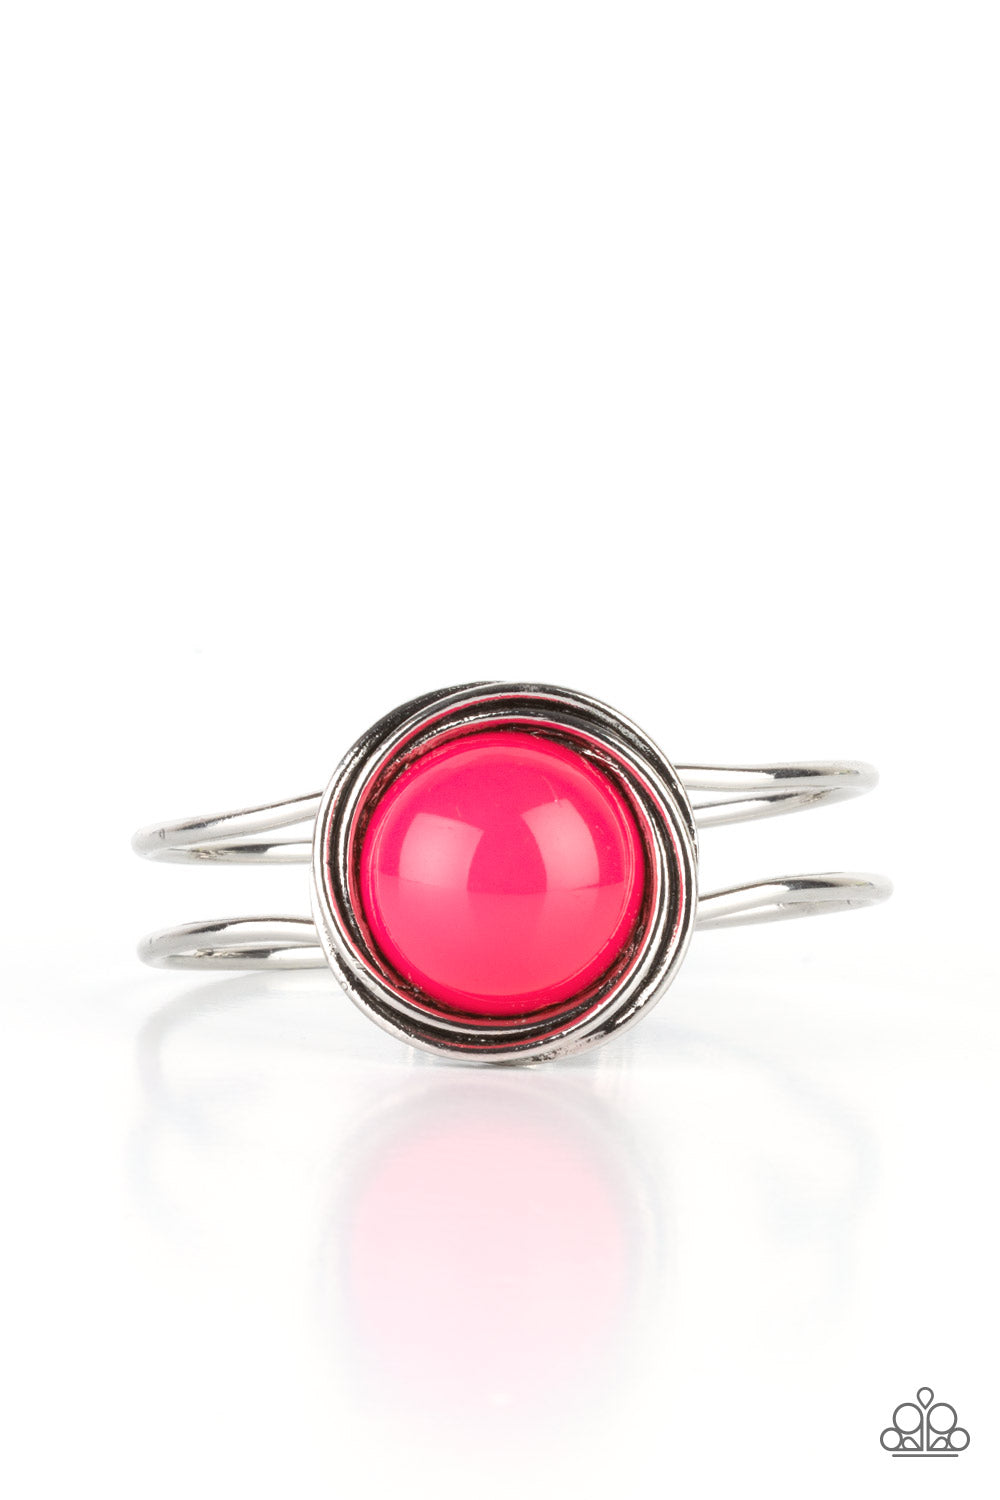 An oversized Raspberry Sorbet bead is pressed into the center of overlapping silver rings that coalesce into a dizzying centerpiece atop an airy silver bangle-like cuff, creating a bold pop of color atop the wrist. Features a hinged closure.